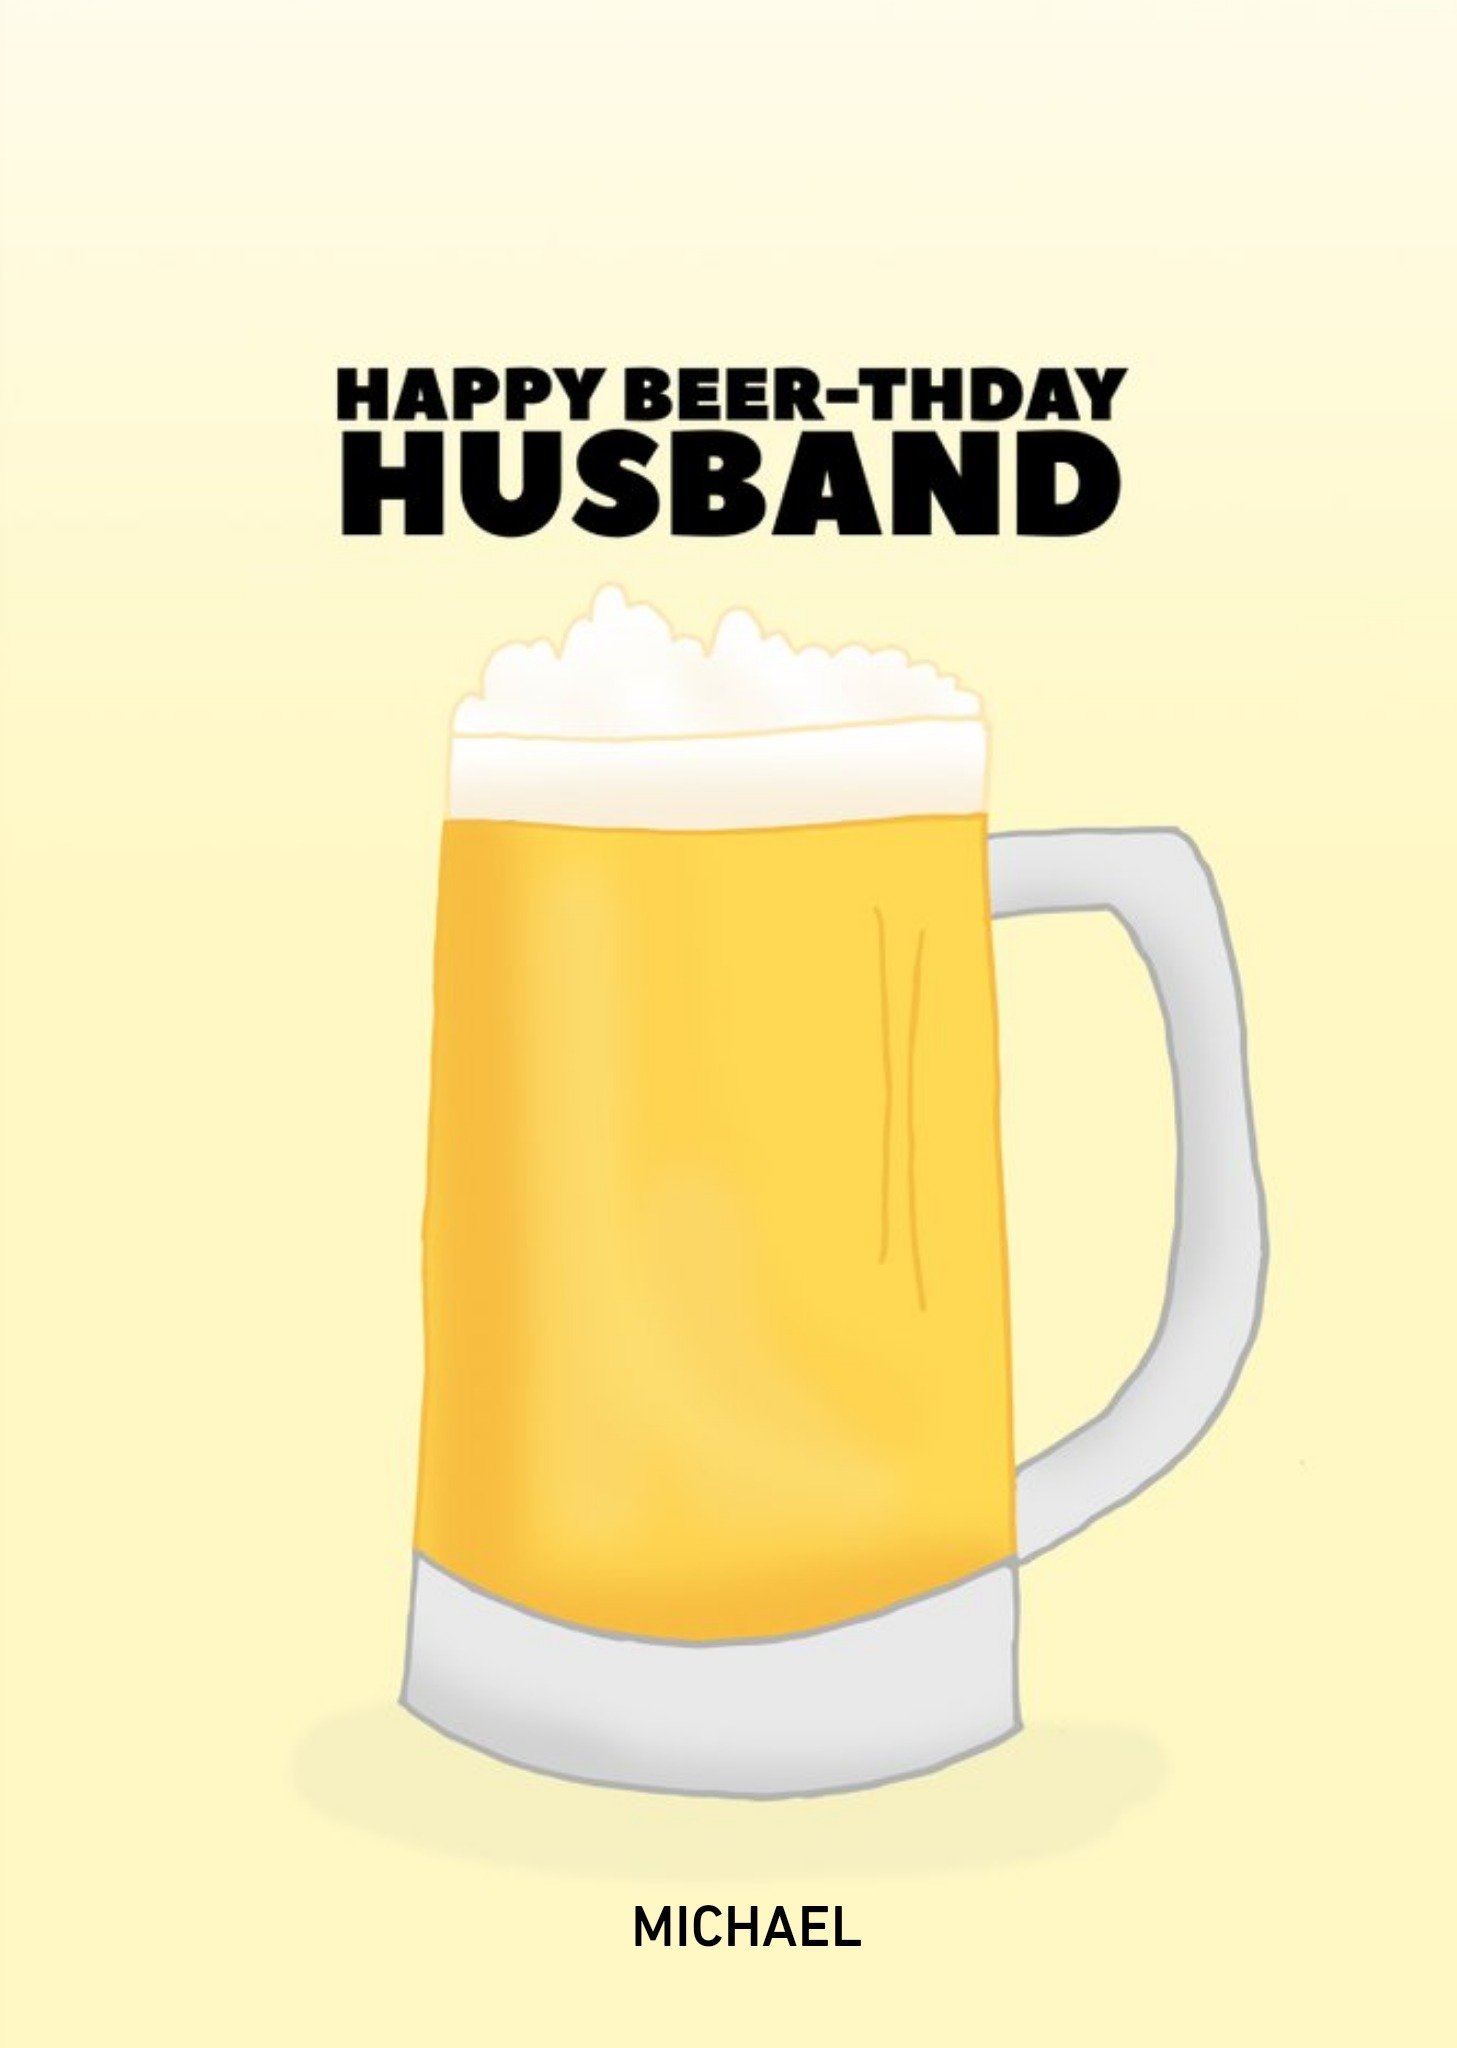 Moonpig Pearl And Ivy Pun Illustrated Beer Customisable Husband Birthday Card Ecard